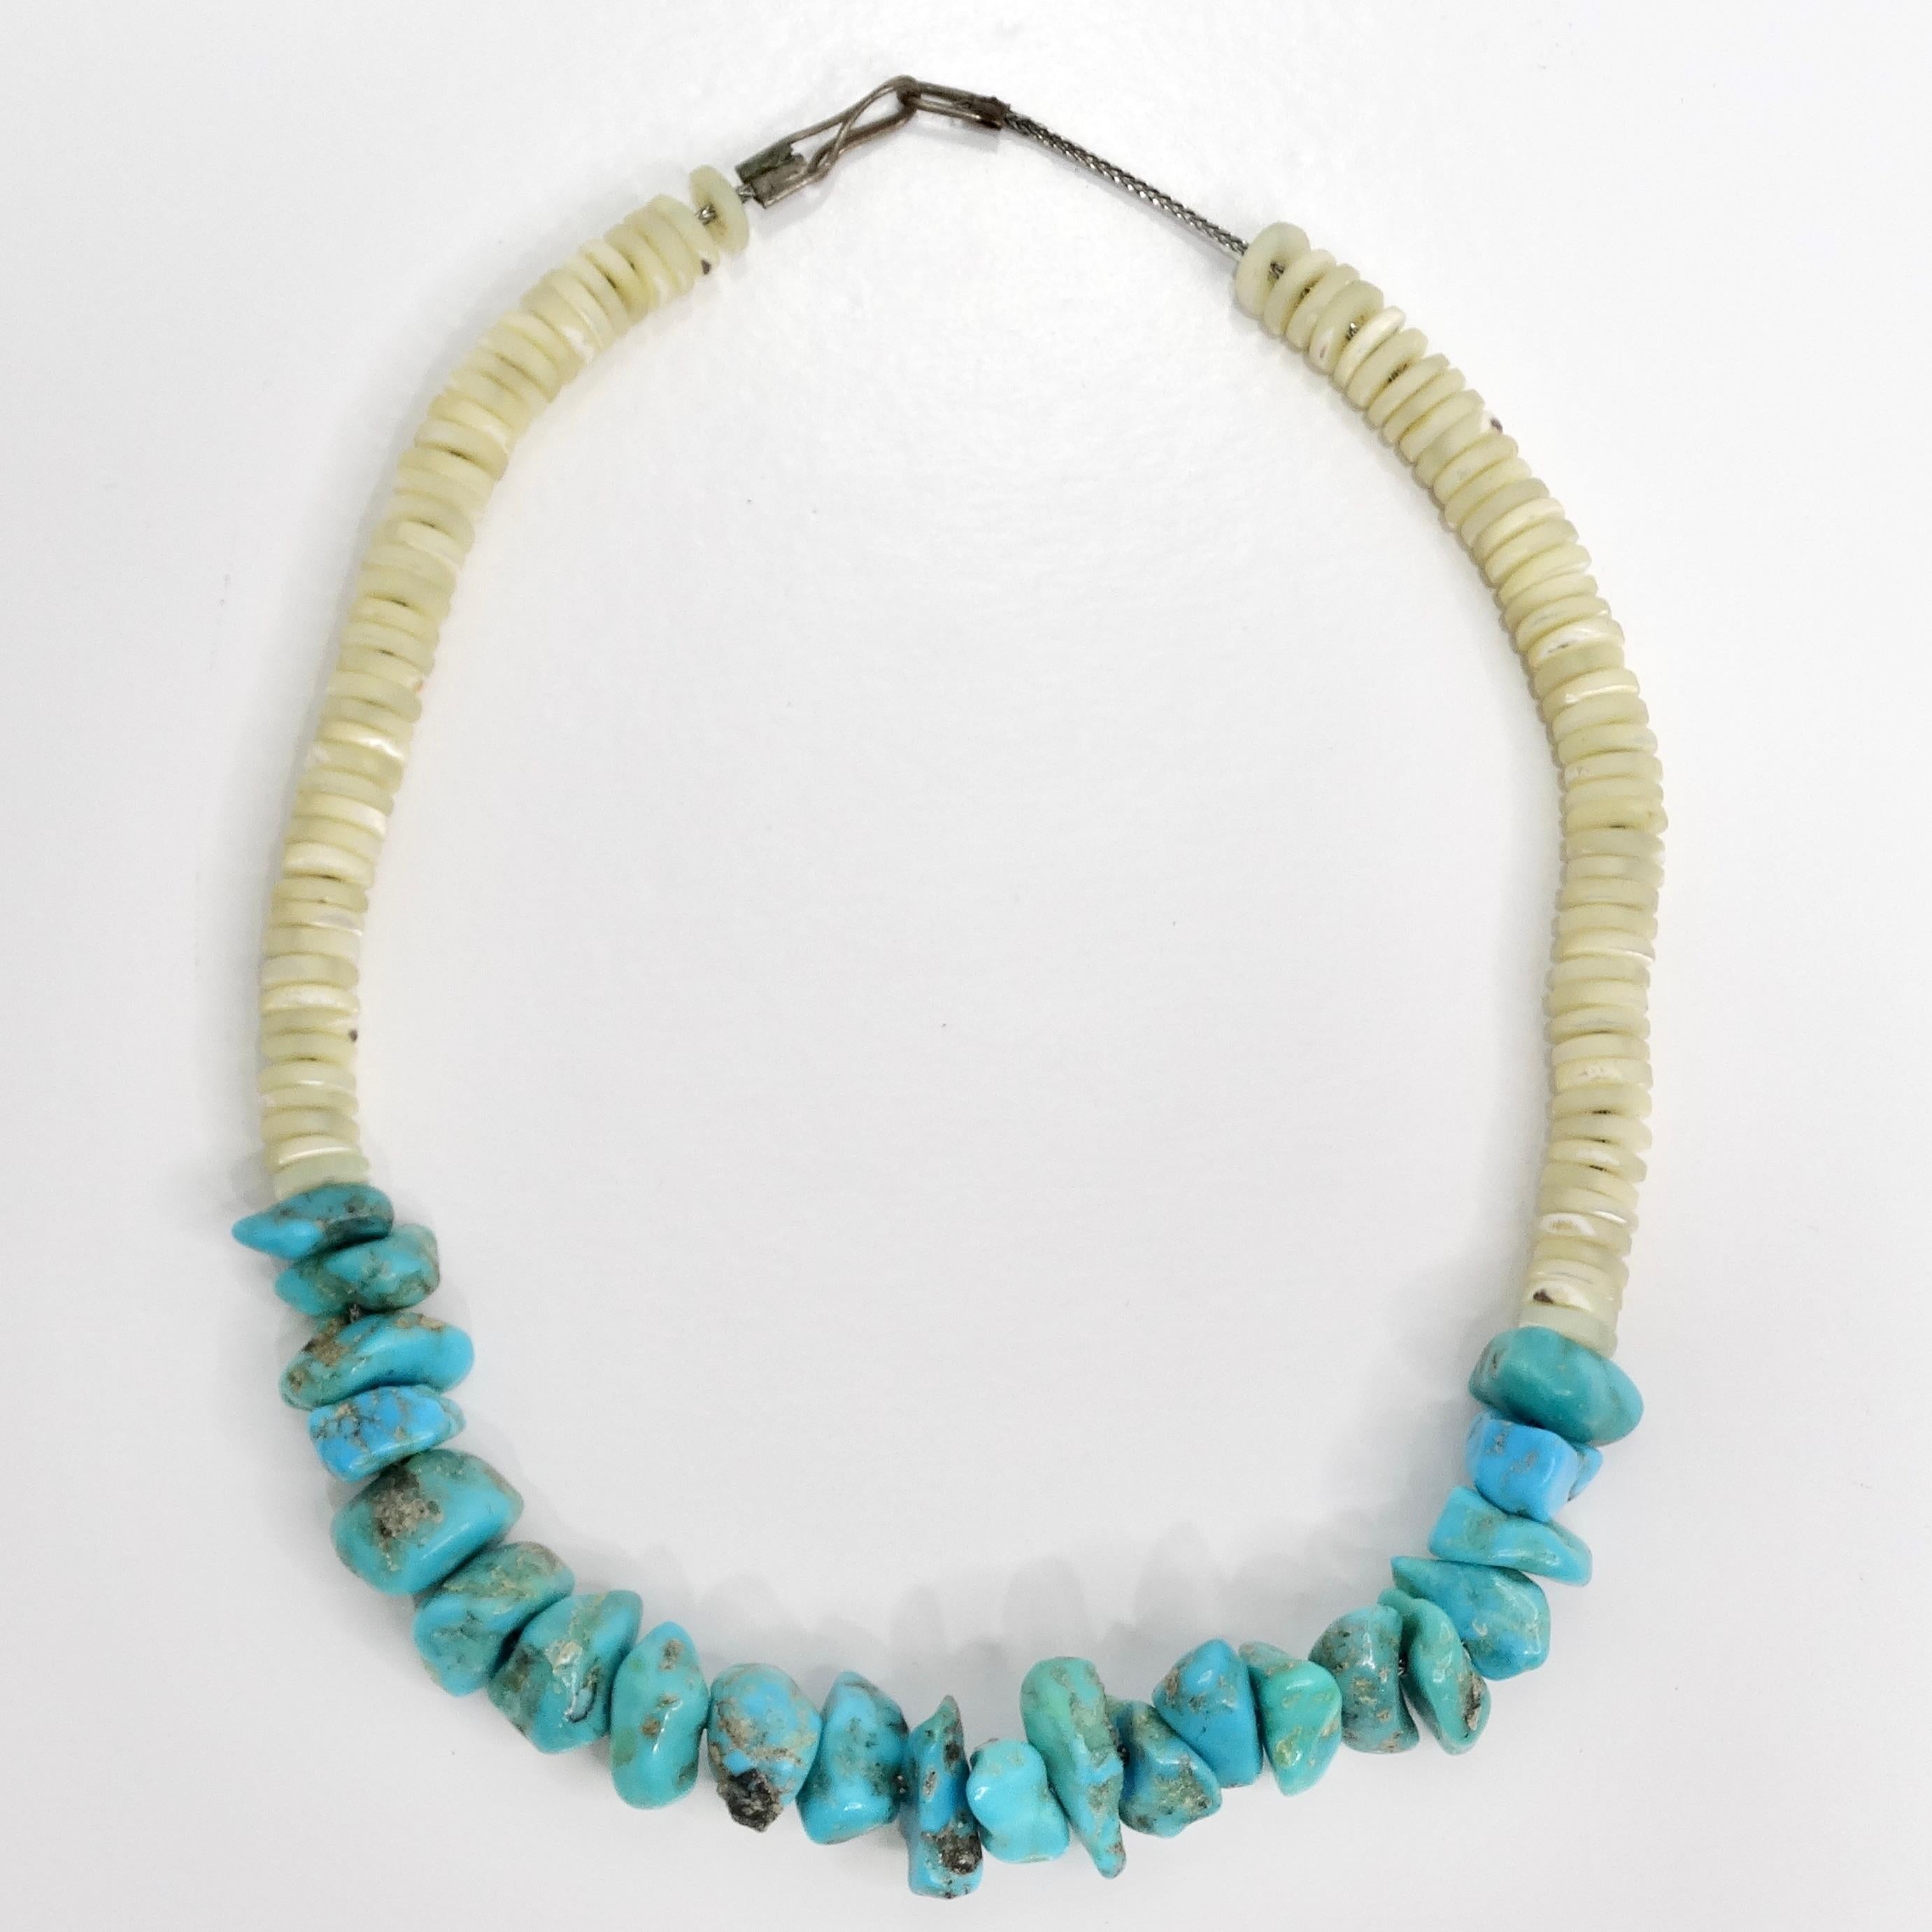 Introducing the 1960s Navajo Turquoise Shell Beaded Necklace, a timeless vintage piece that captures the rich tradition and craftsmanship of Navajo jewelry. This beautiful choker features a striking combination of vibrant blue turquoise beads and